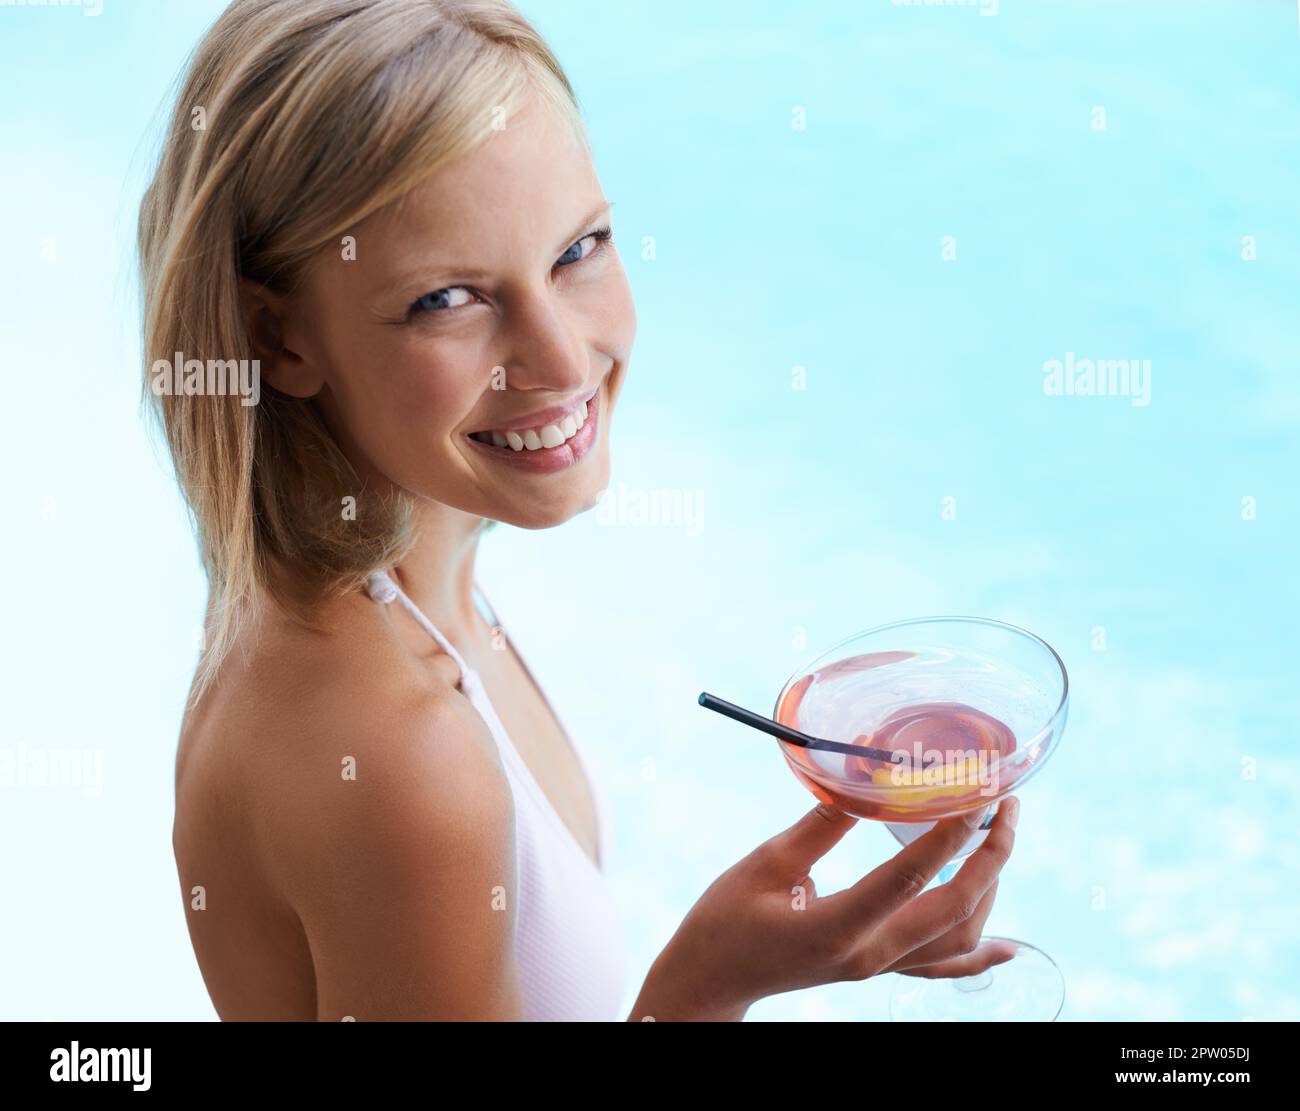 https://c8.alamy.com/comp/2PW05DJ/poolside-cocktails-young-woman-having-cocktails-by-a-pool-2PW05DJ.jpg